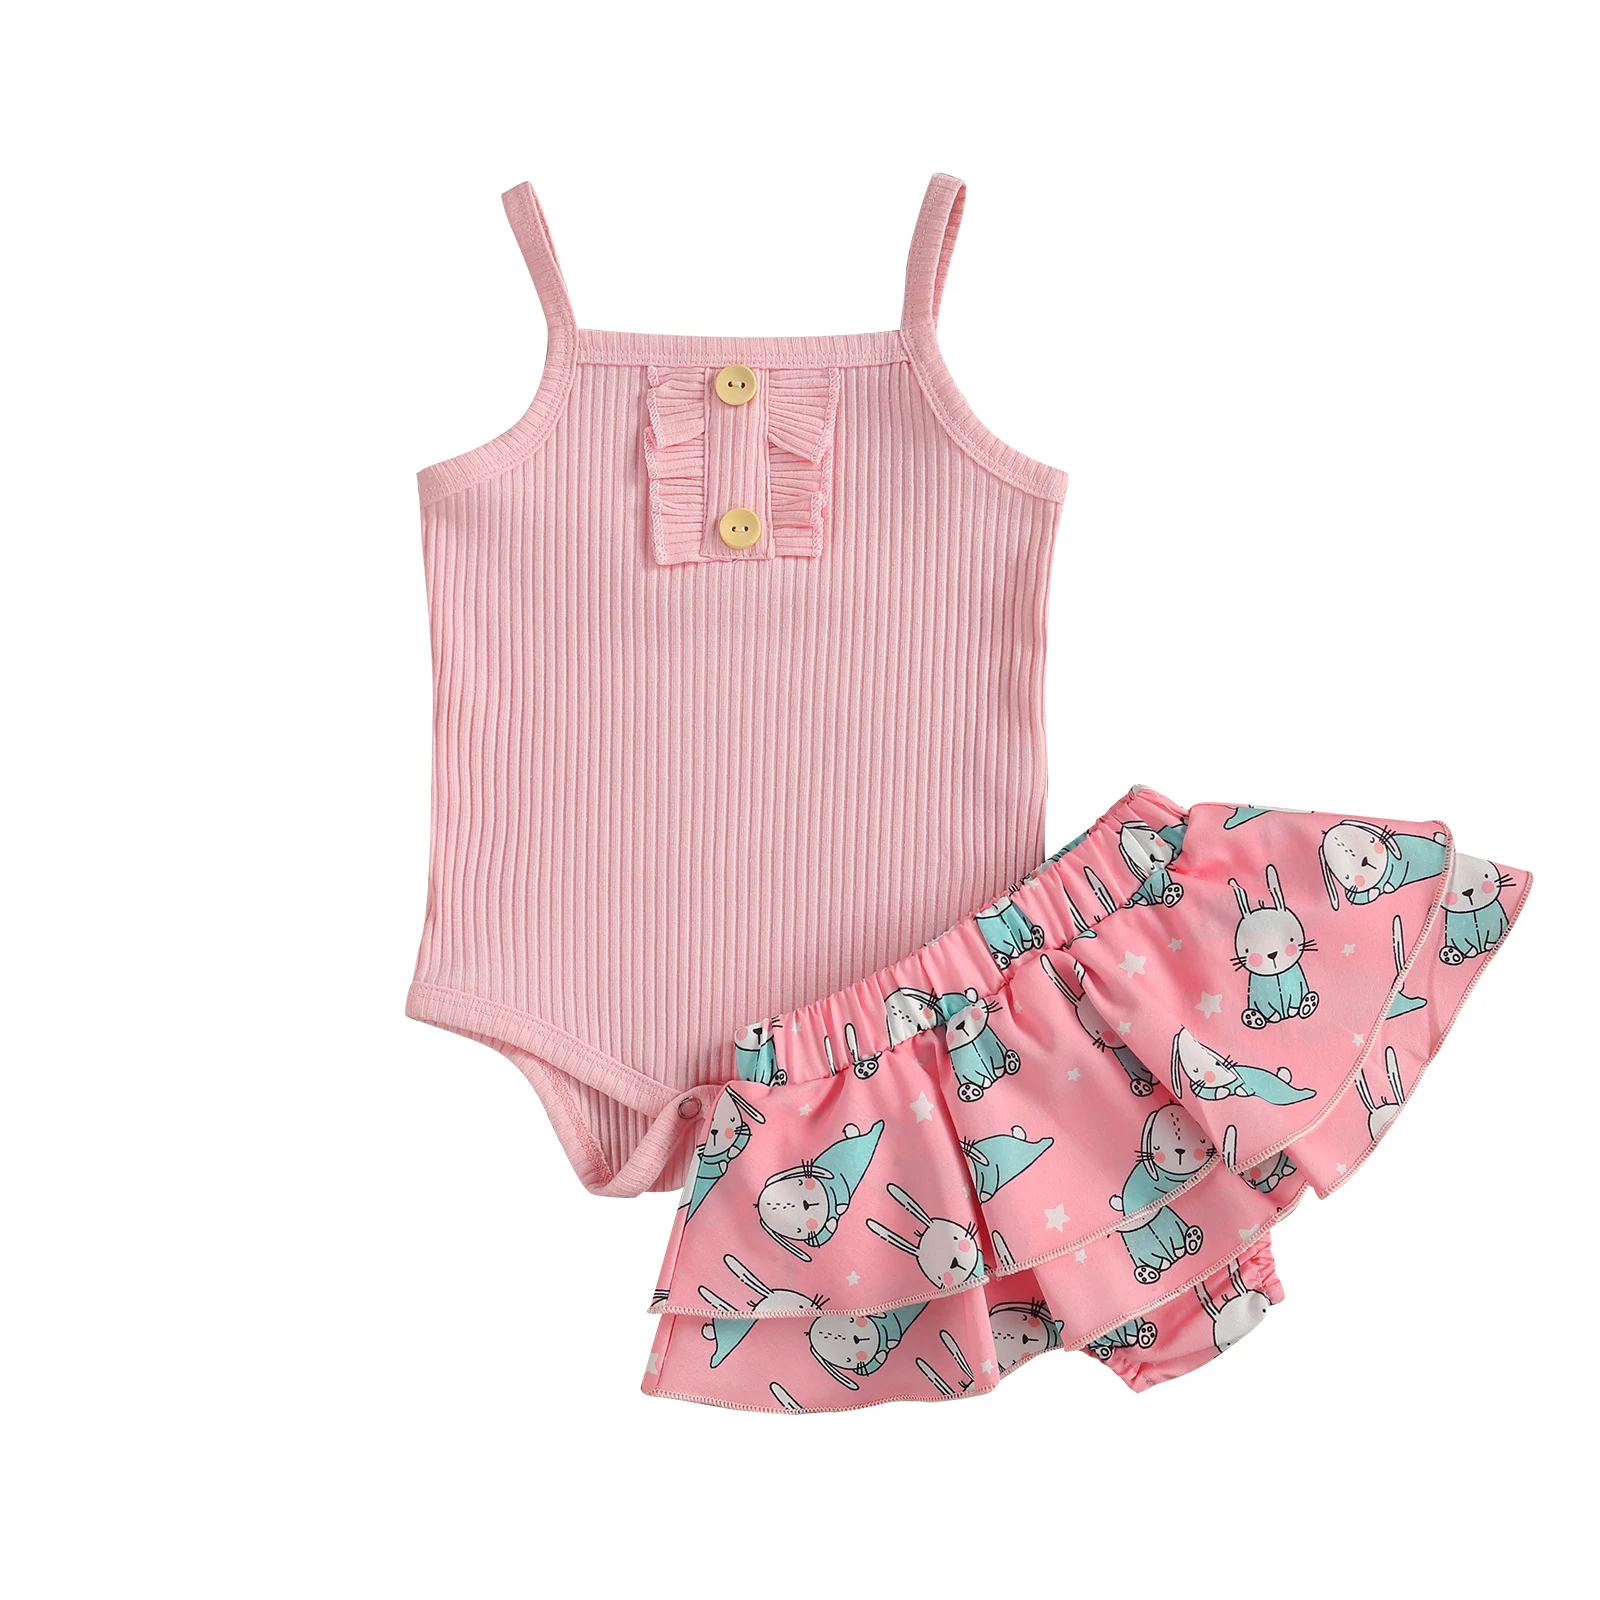 

OPPERIAYA 2Pcs Fashionable Baby Girls Easter Outfit Summer Breathable Solid Sleeveless Suspender Bodysuit Bunny Print Skirts Set